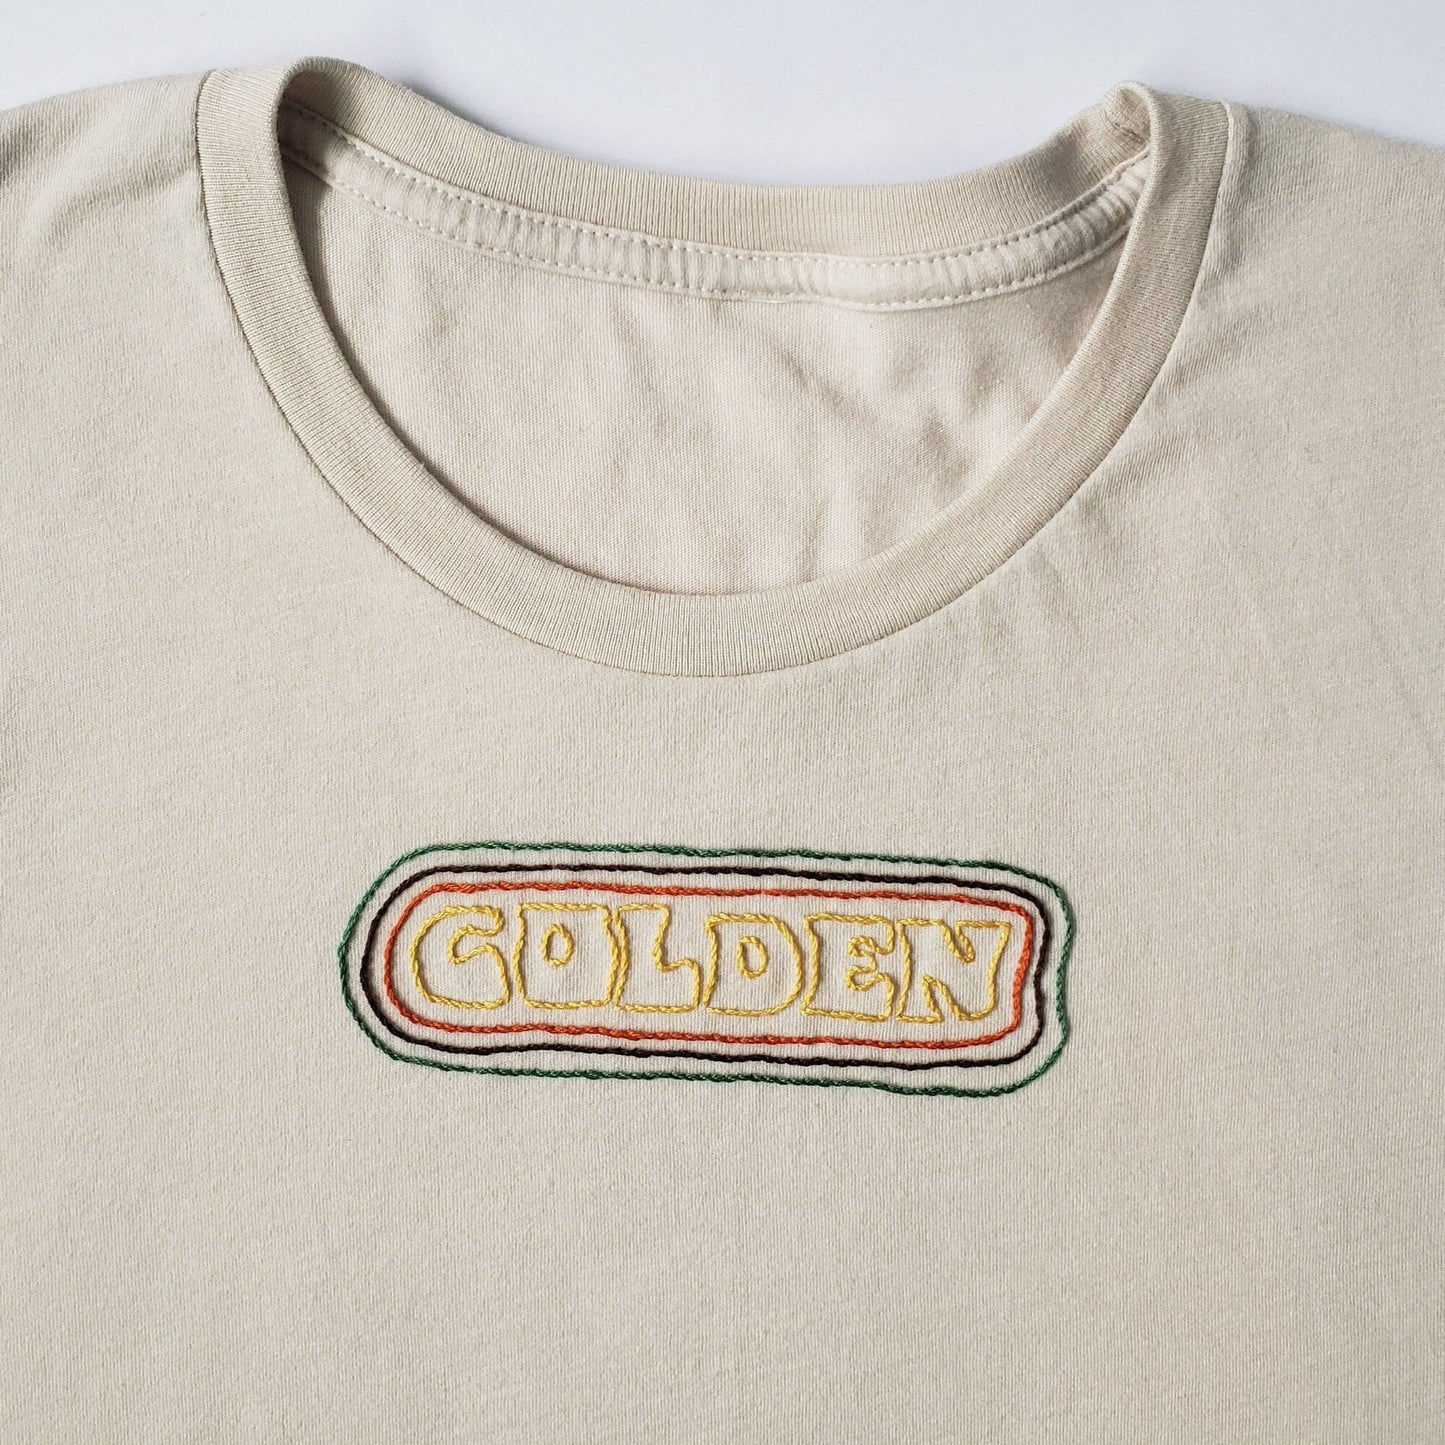 A close up of a soft looking sandstone crewneck tee. "GOLDEN" is hand sewn in a groovy font in burnished gold thread. The text is encircled by an orange line, then brown, then green. About 4 mm is between each concentric border. The effect is retro and awfully fun, I think.